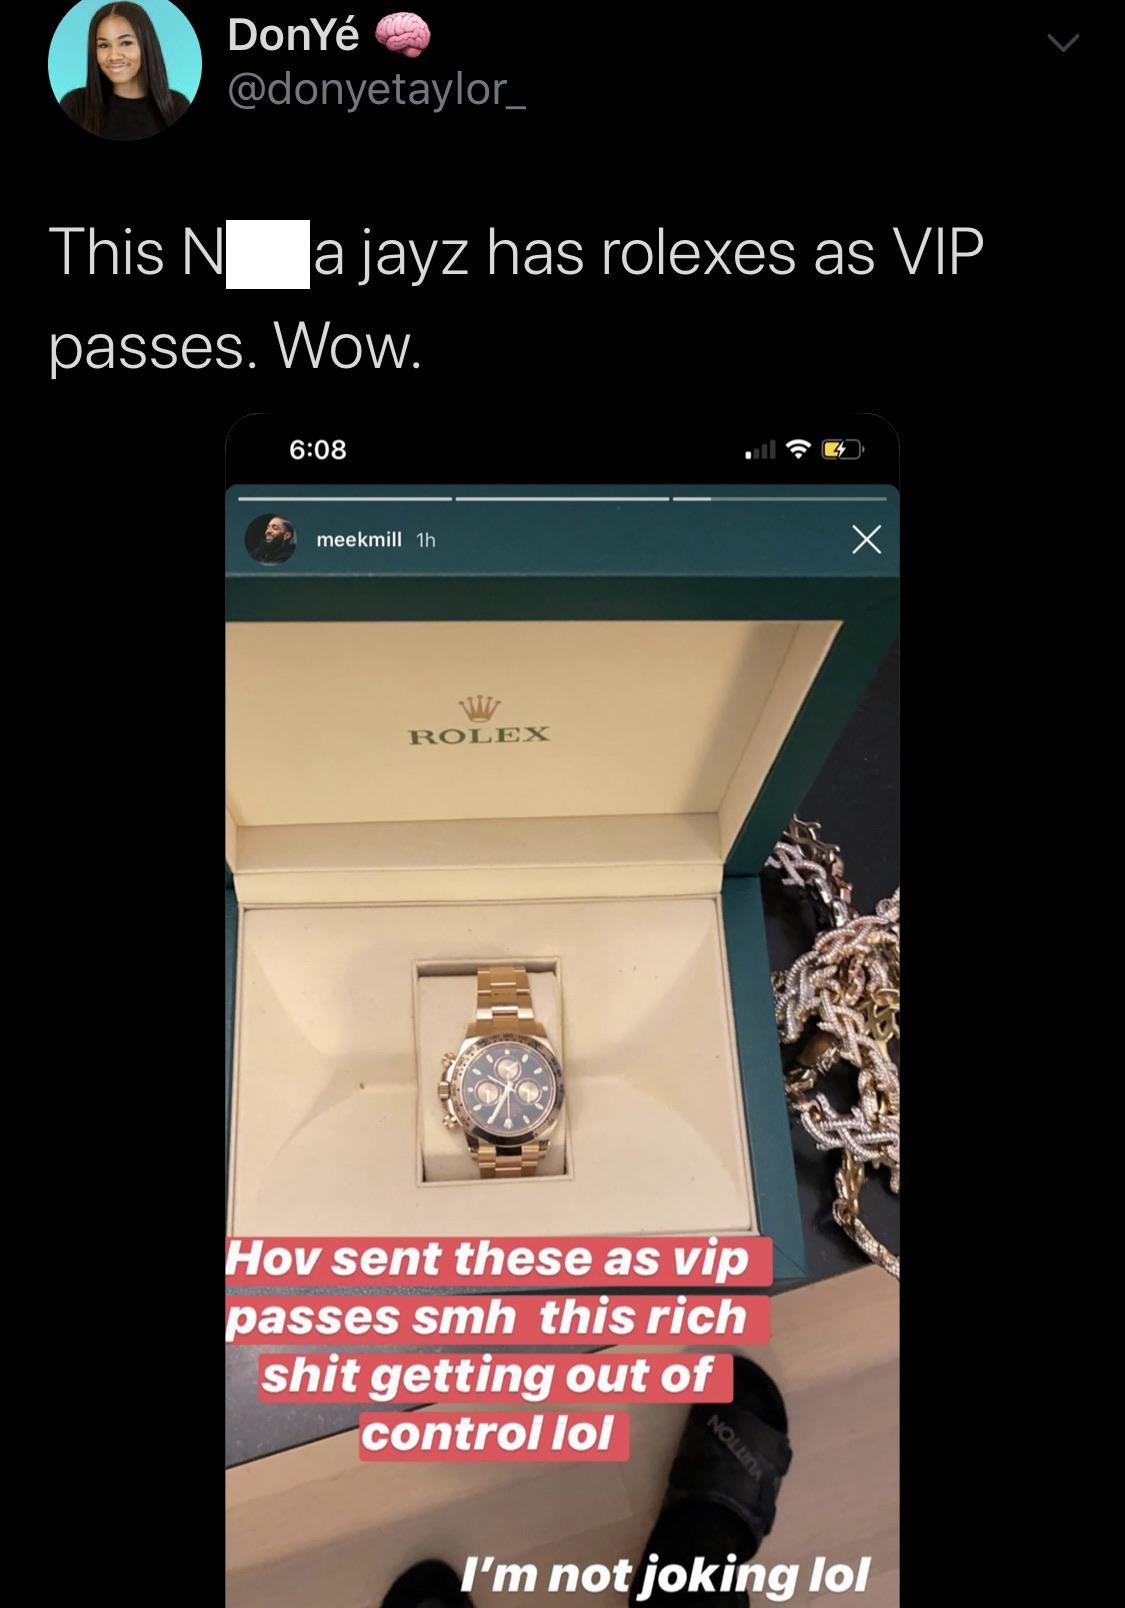 screenshot - DonY Dony This N a jayz has rolexes as Vip passes. Wow. meekmill 1h meekmill an X Rolex Hov sent these as vip passes smh this rich shit getting out of control lol Nou I'm not joking lol